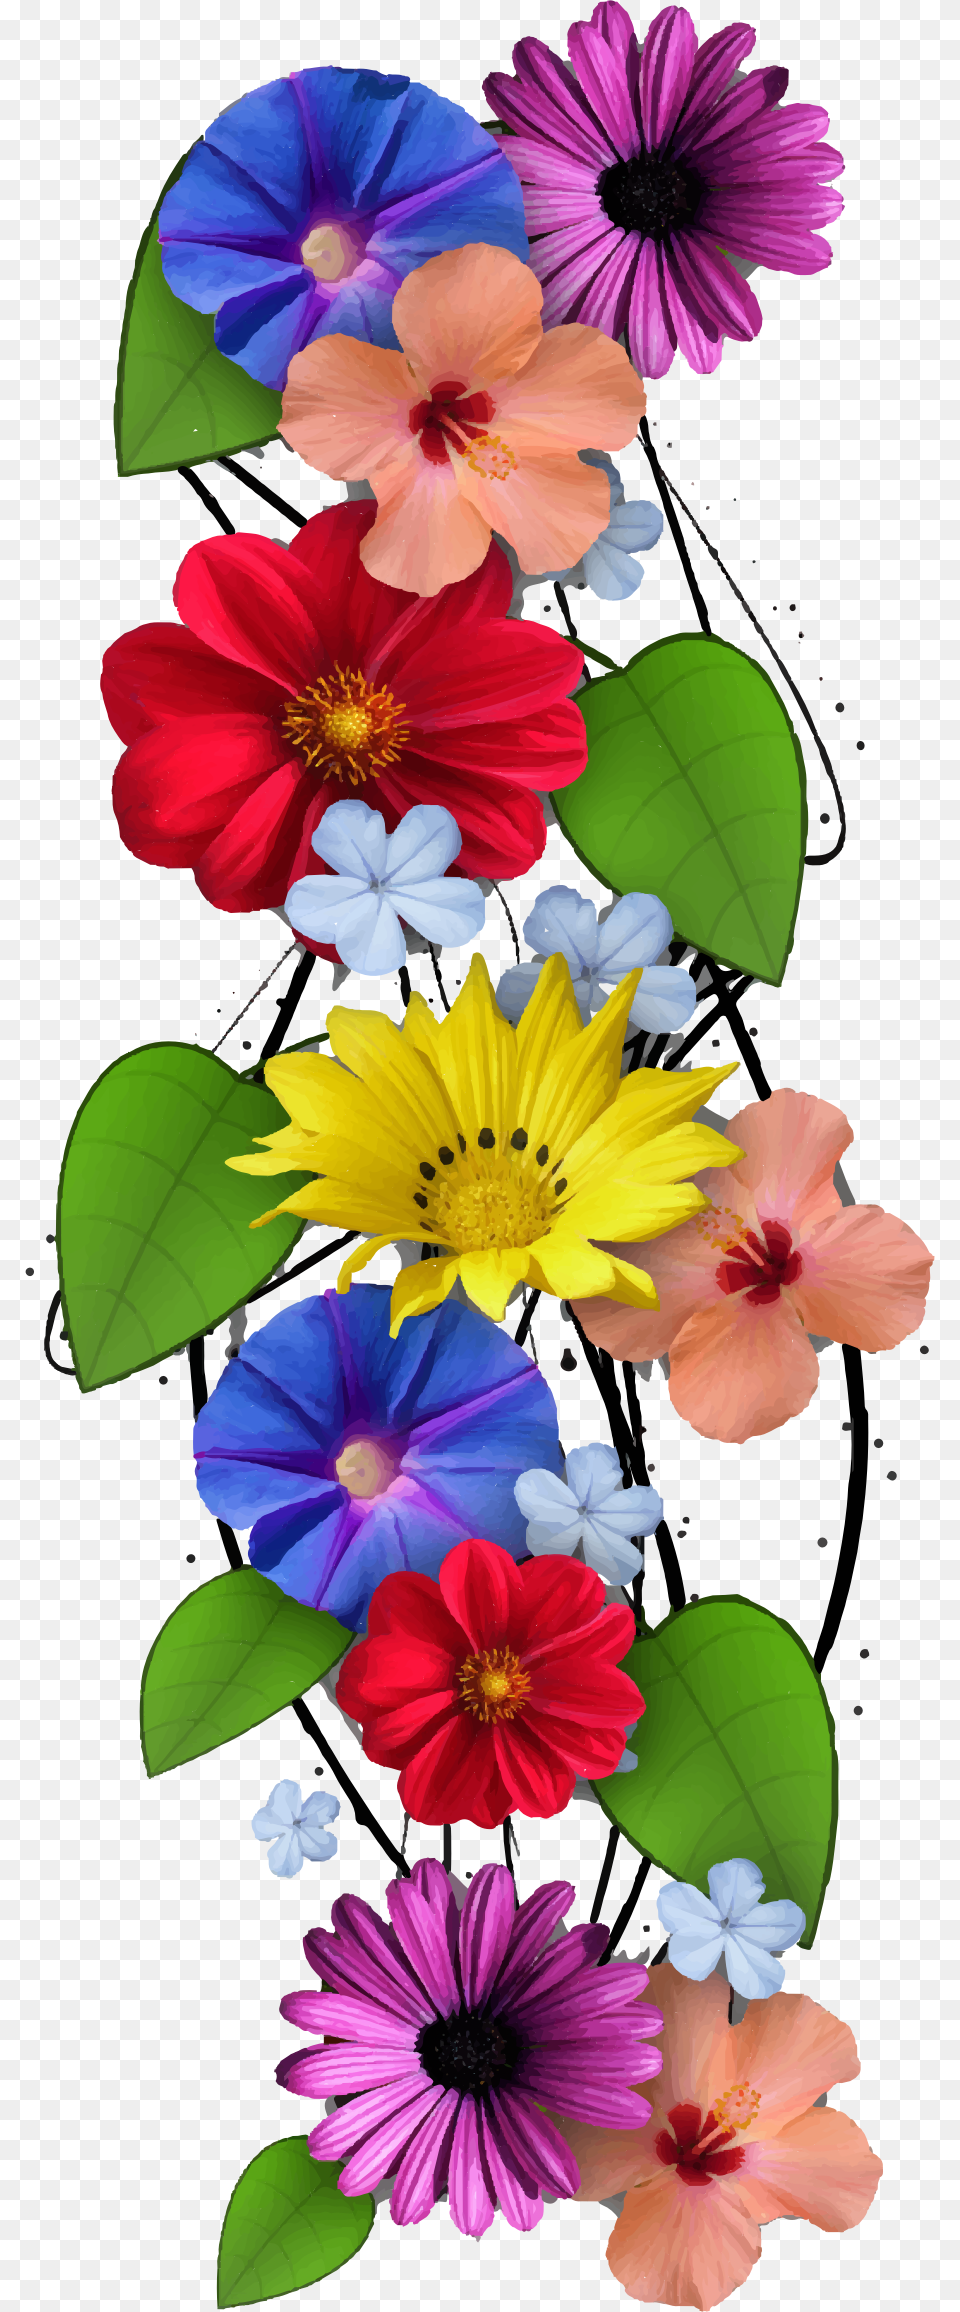 Big Image Vertical Images Of Flowers, Anemone, Daisy, Flower, Geranium Png